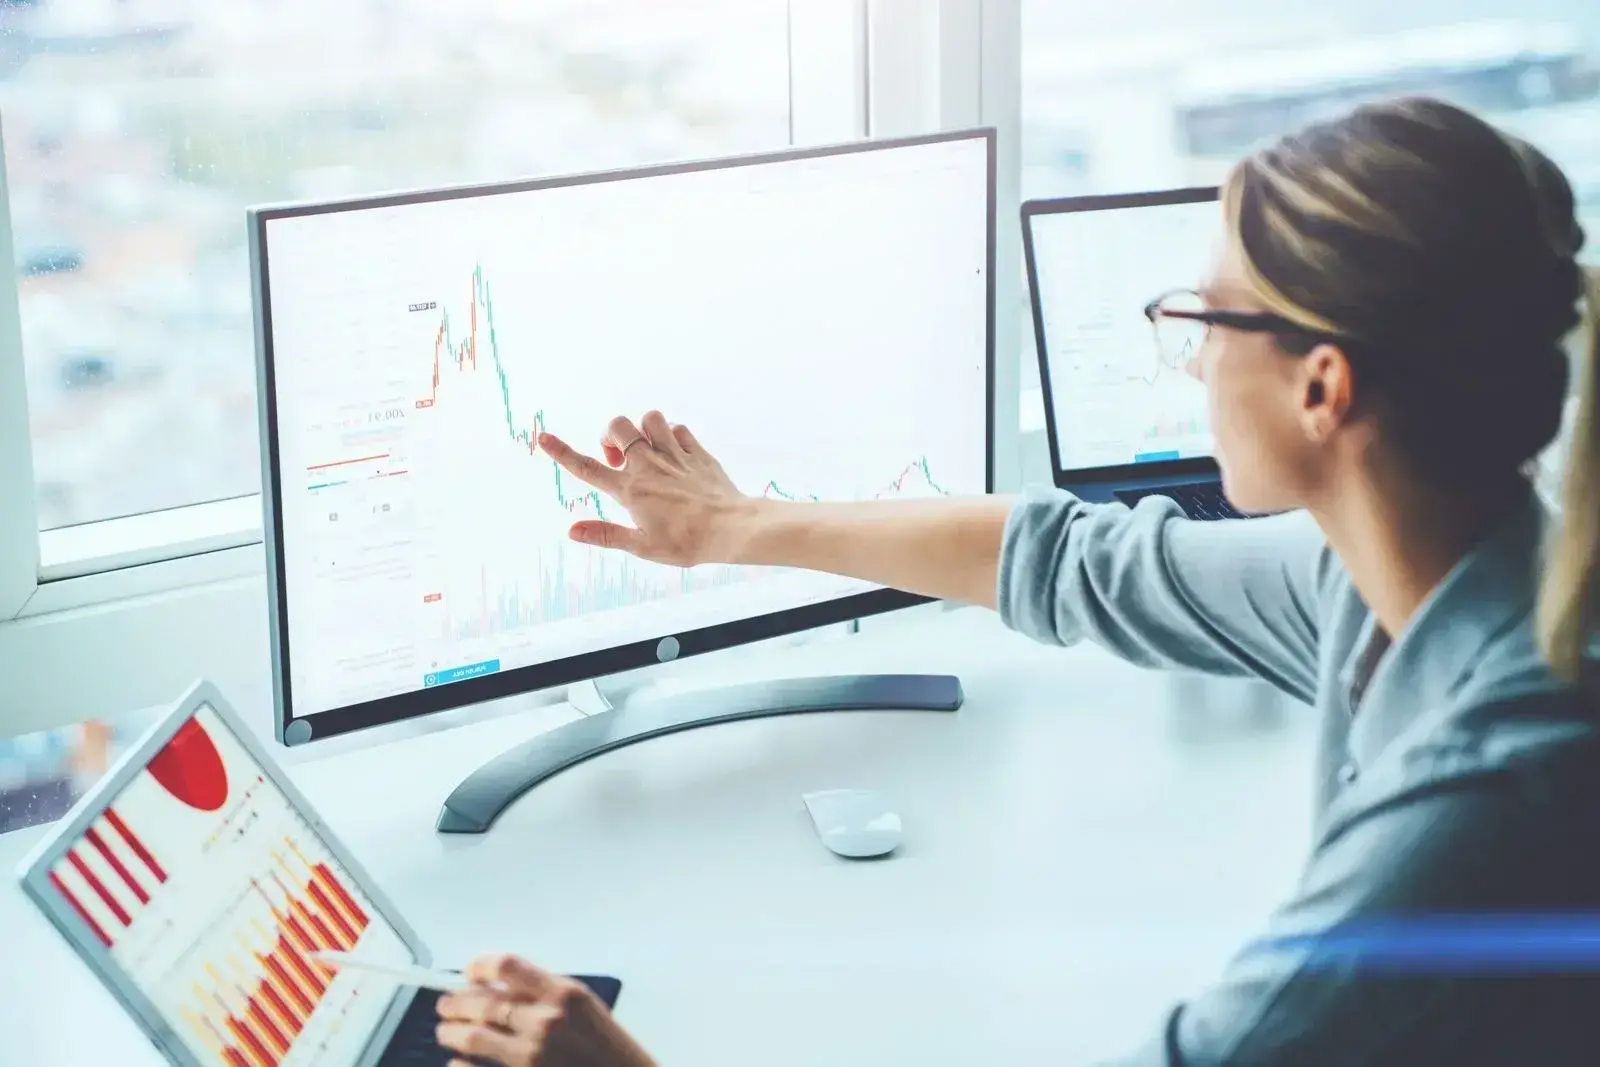 Image of Stocks are a key component in every investor's portfolio. Find out everything you need to know about its risks and how to make smart investments.